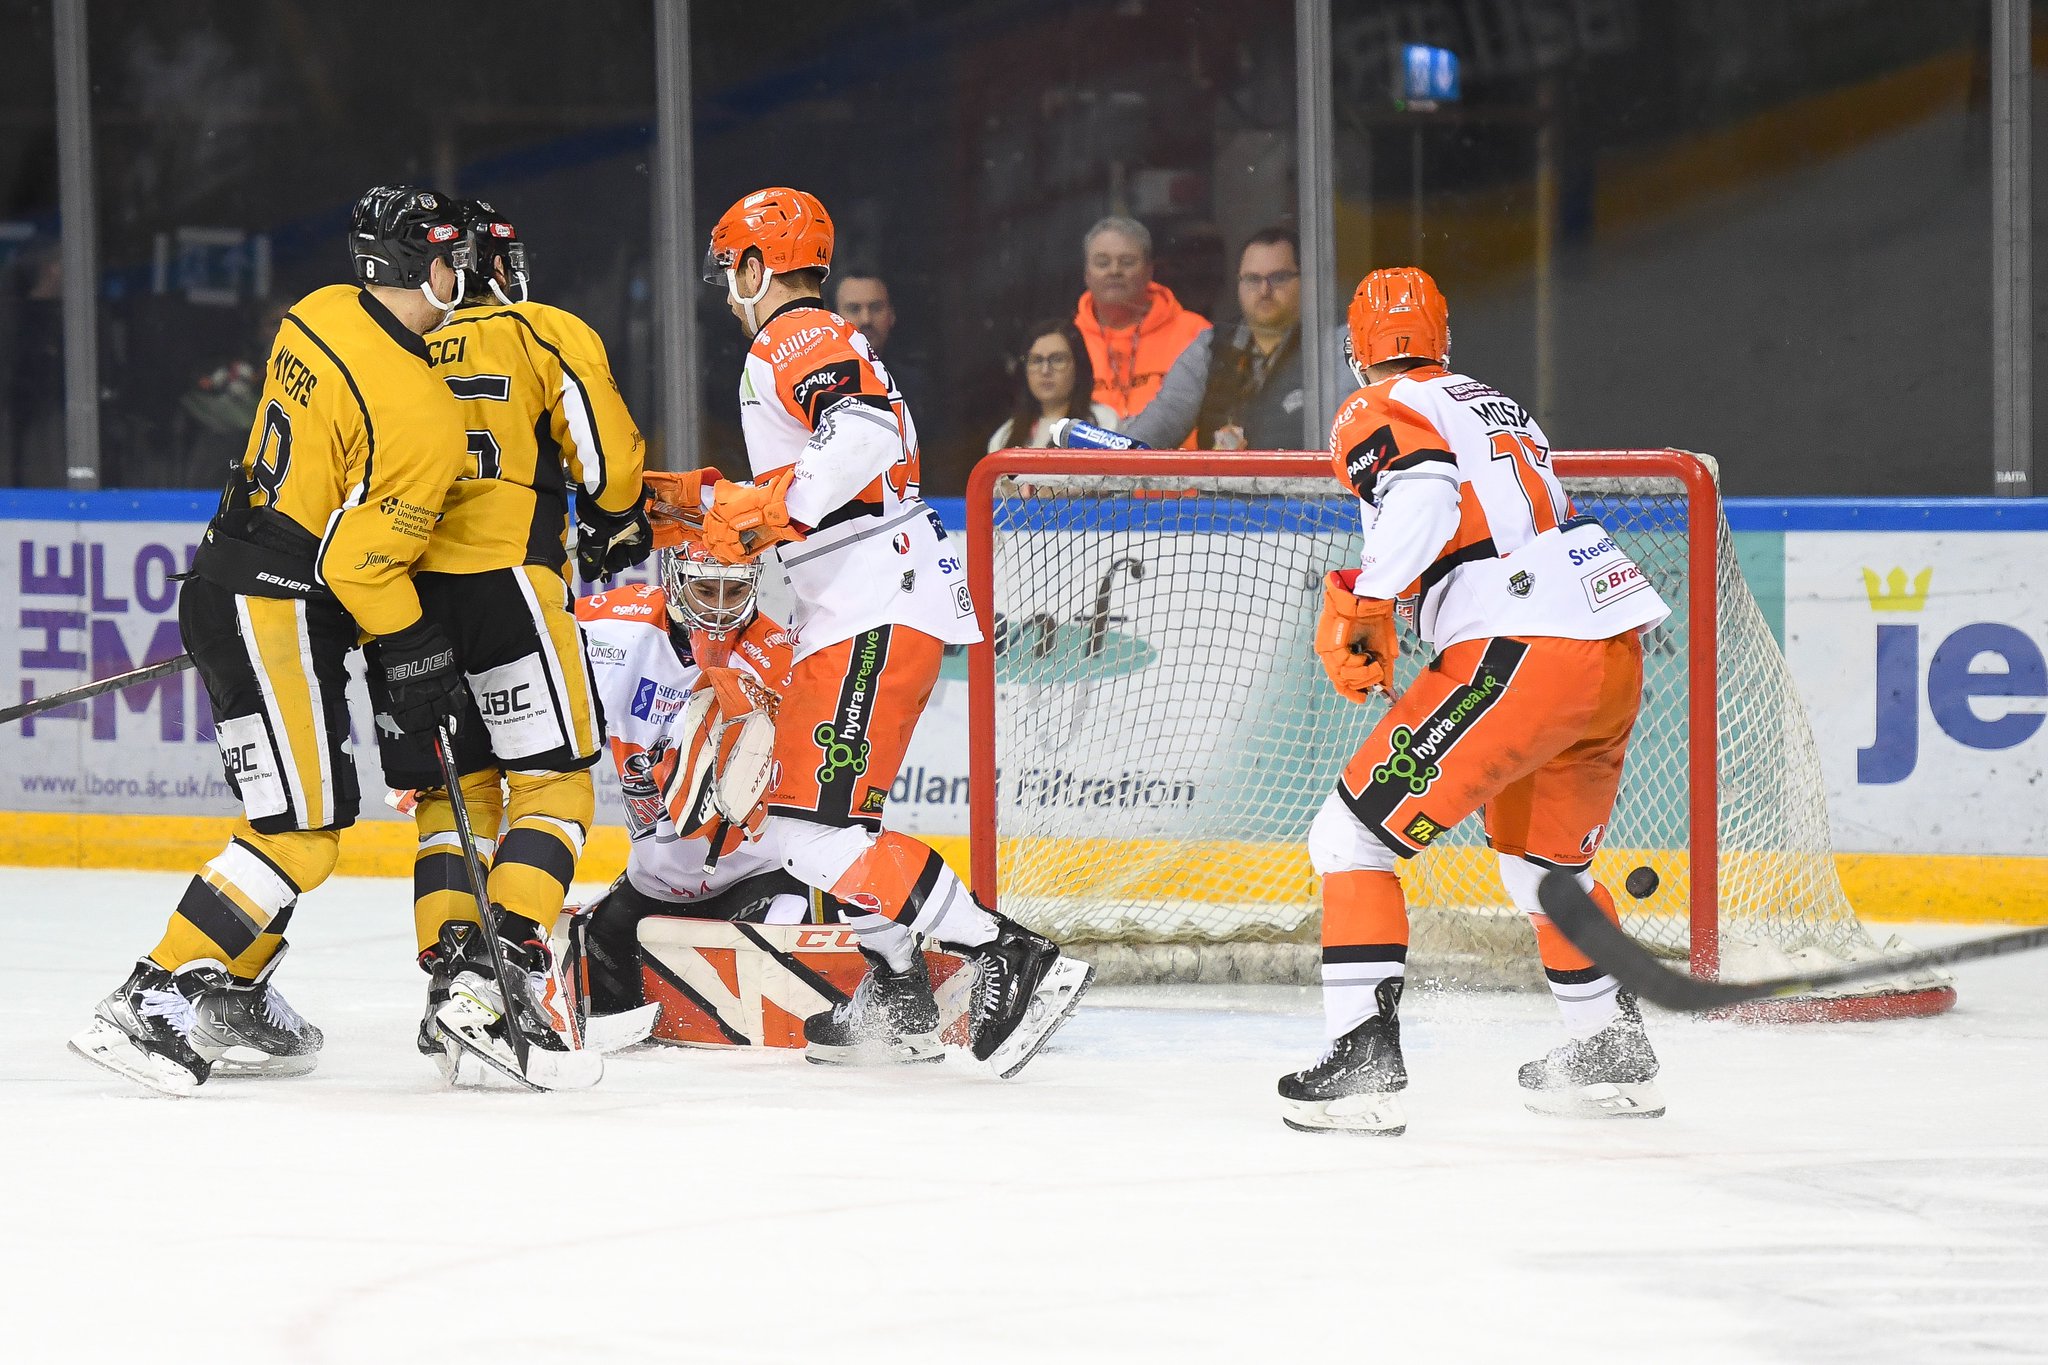 MATCH REPORT: PANTHERS 3-4 STEELERS (OVERTIME) Top Image